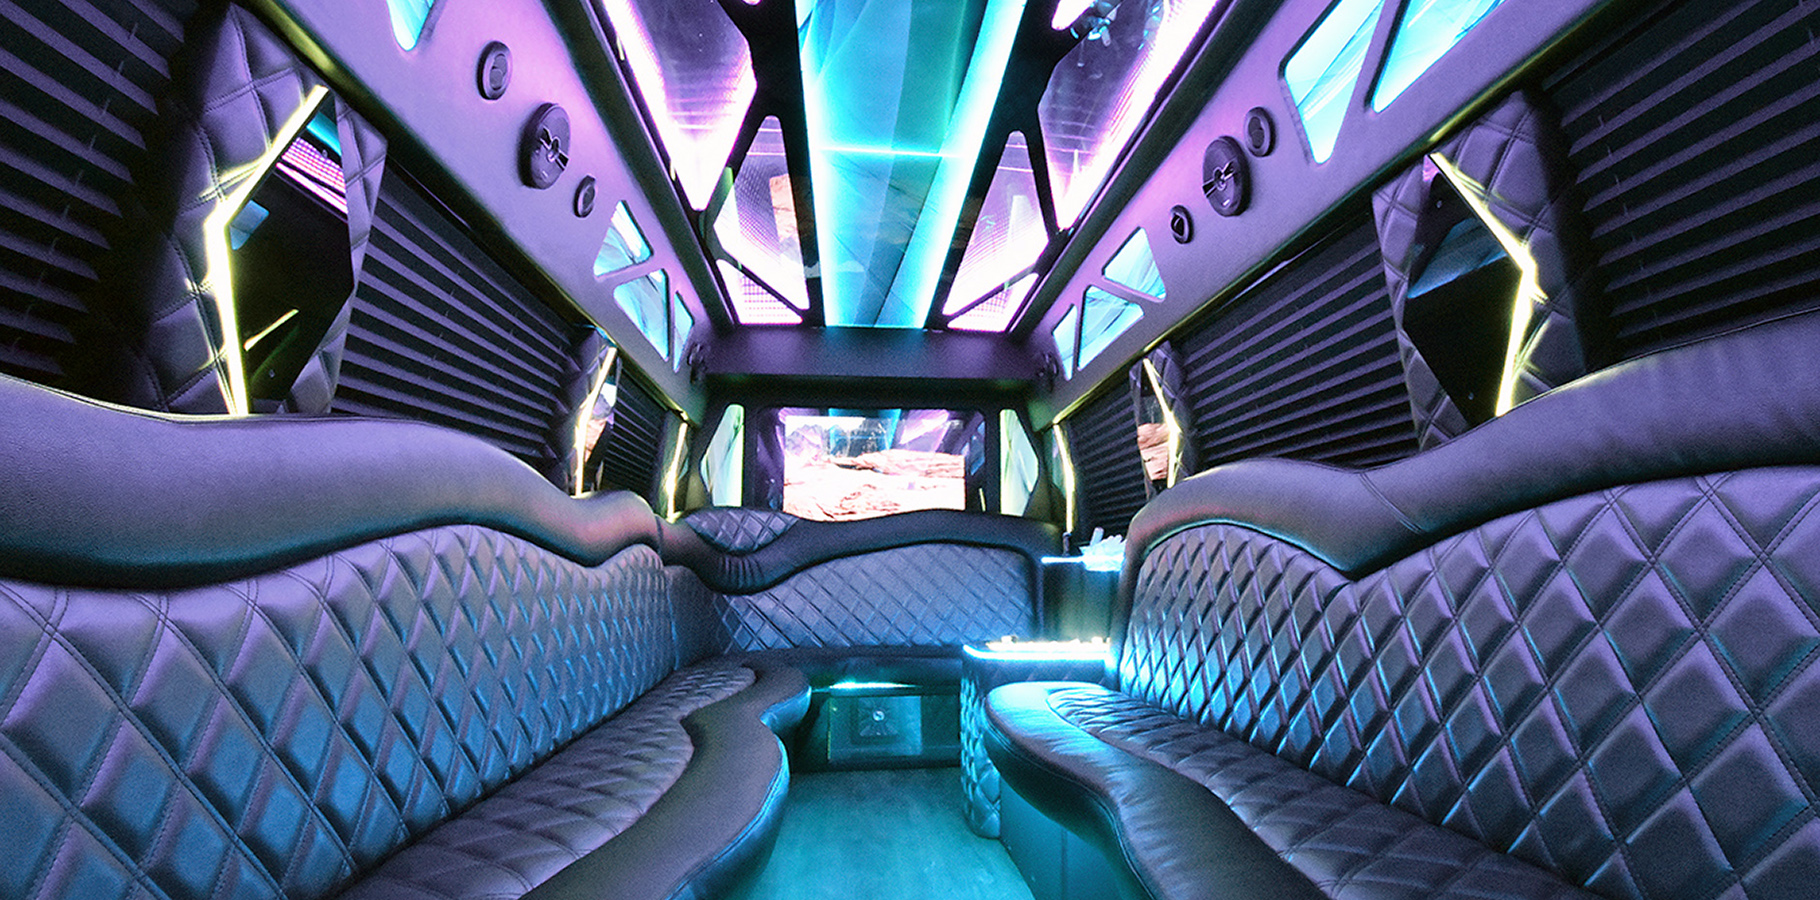 Limo Service Chicago